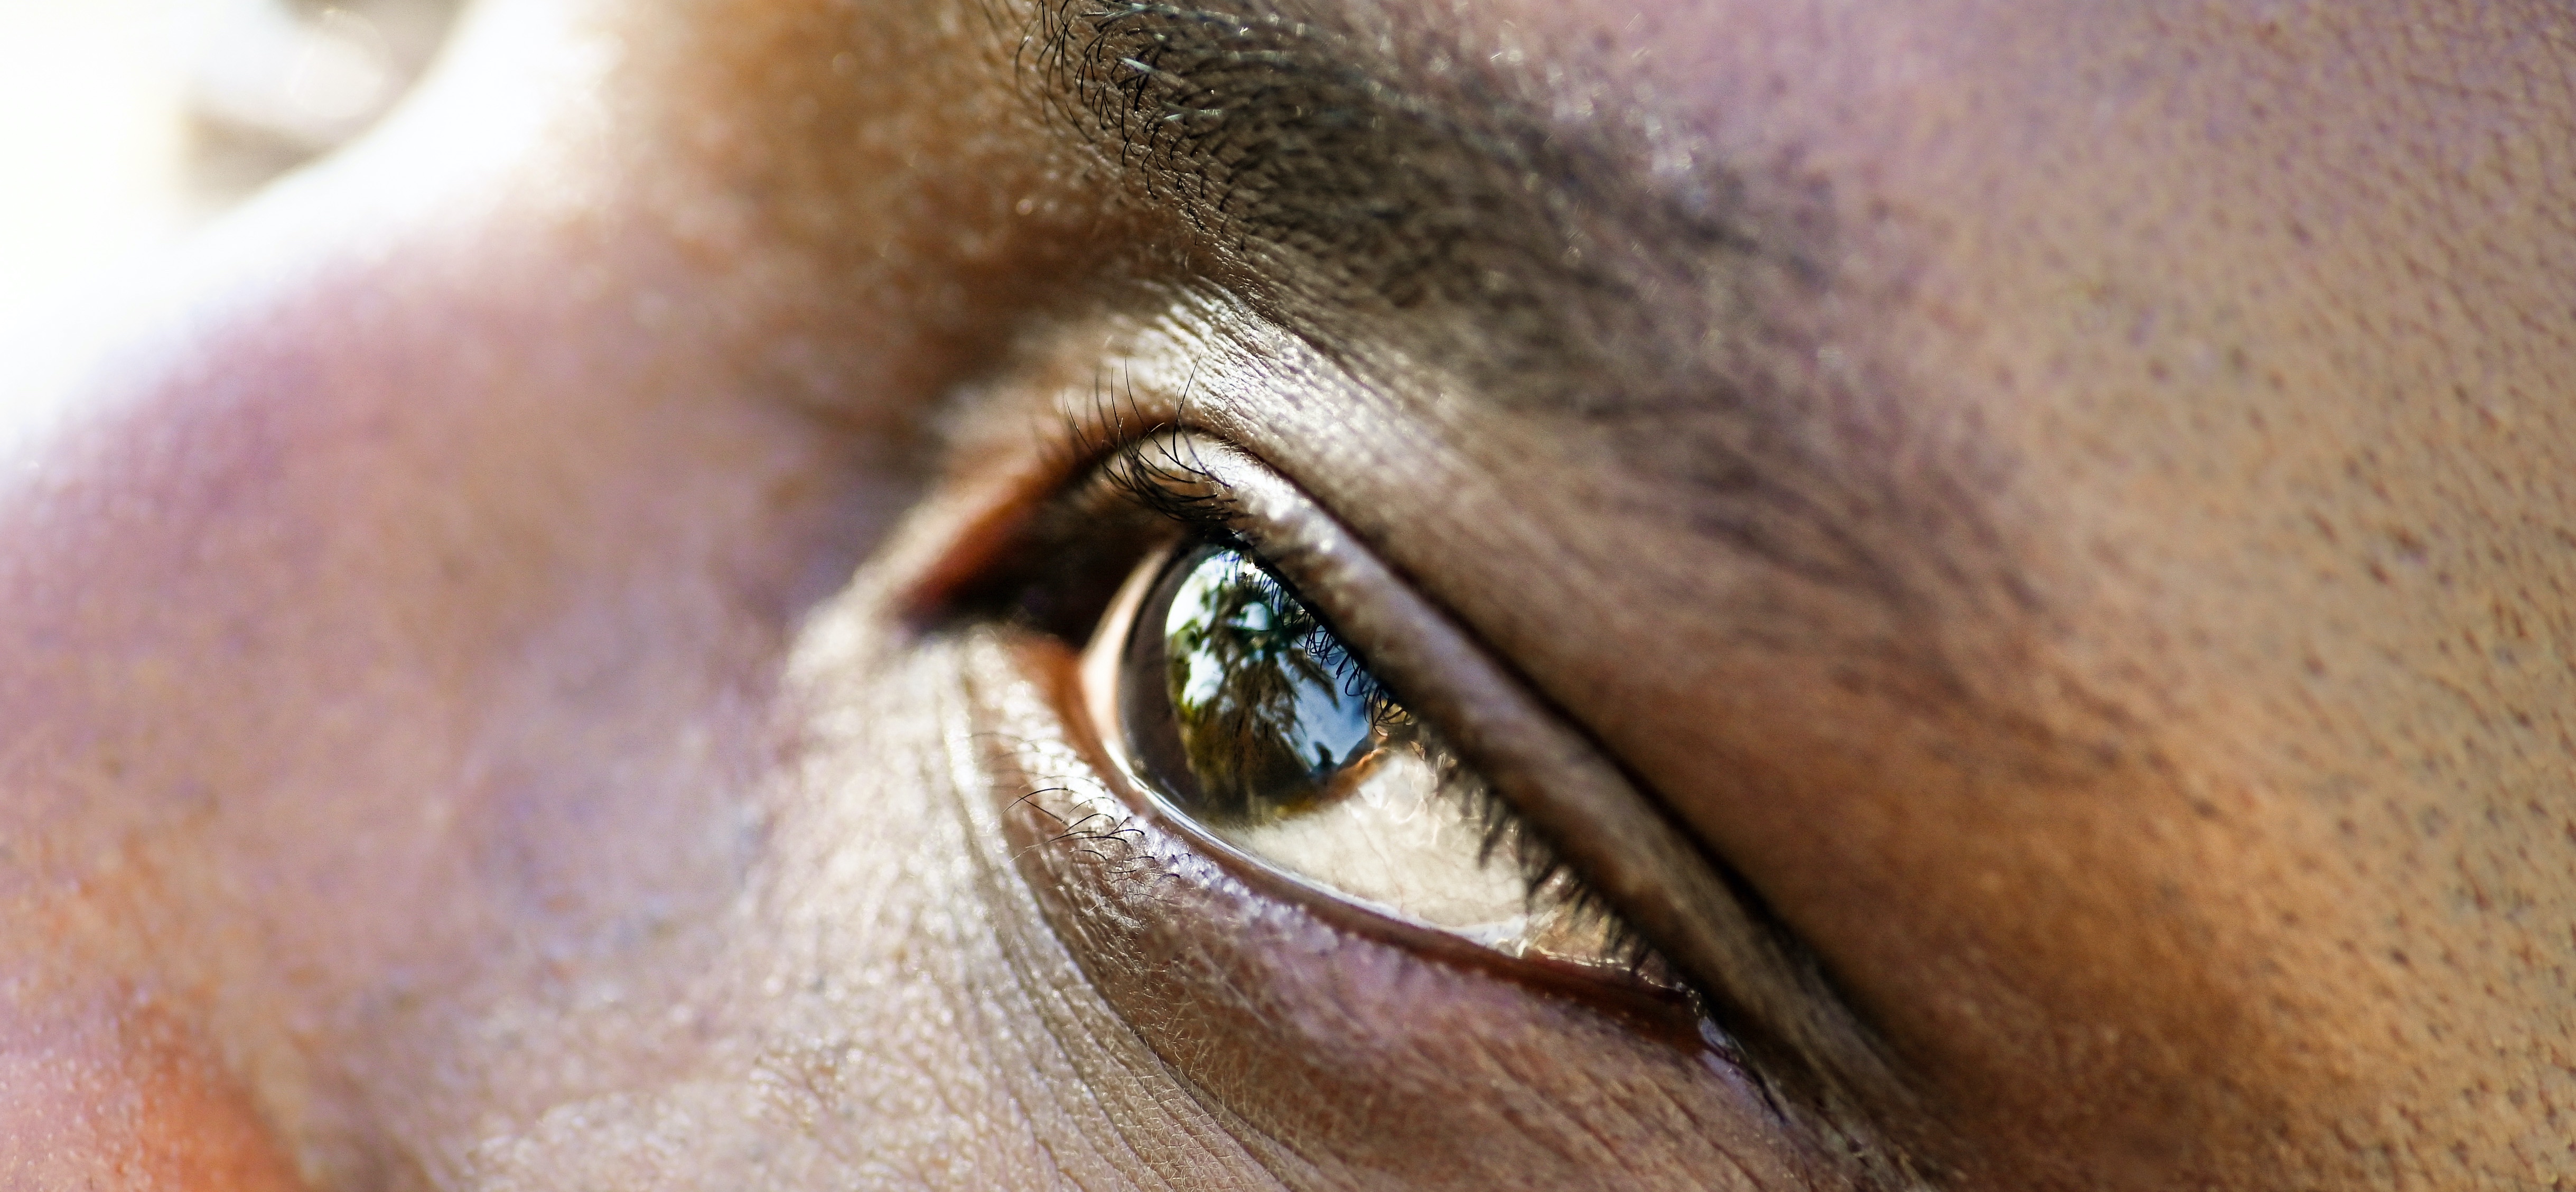 close-up of man's face, focusing on his eye, as he looks upward